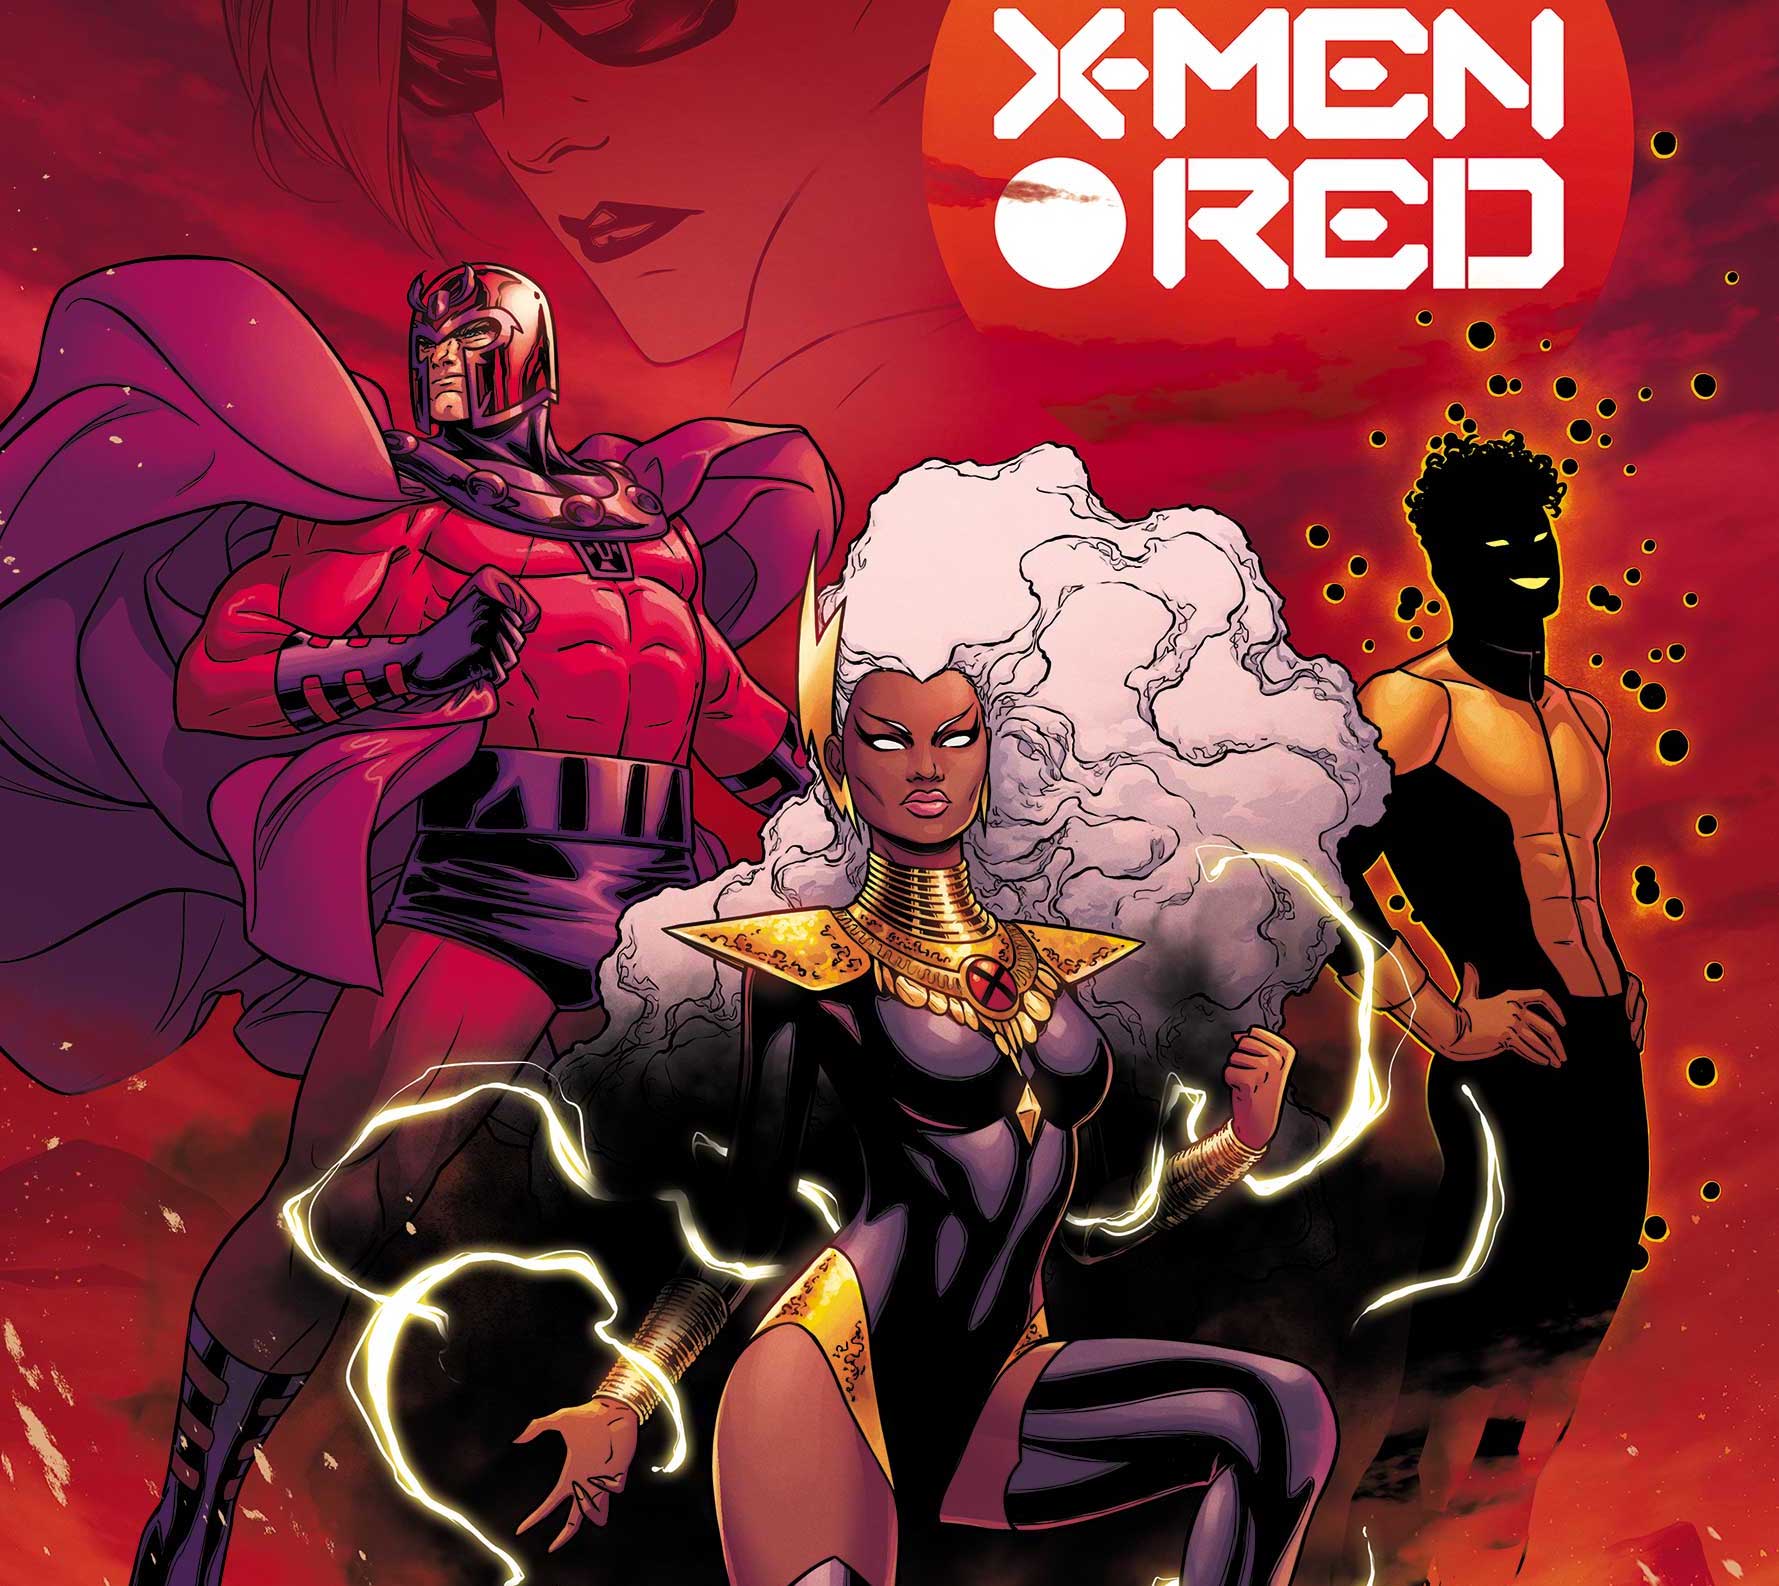 'X-Men Red' #1 fundamentally understands Storm and Magneto